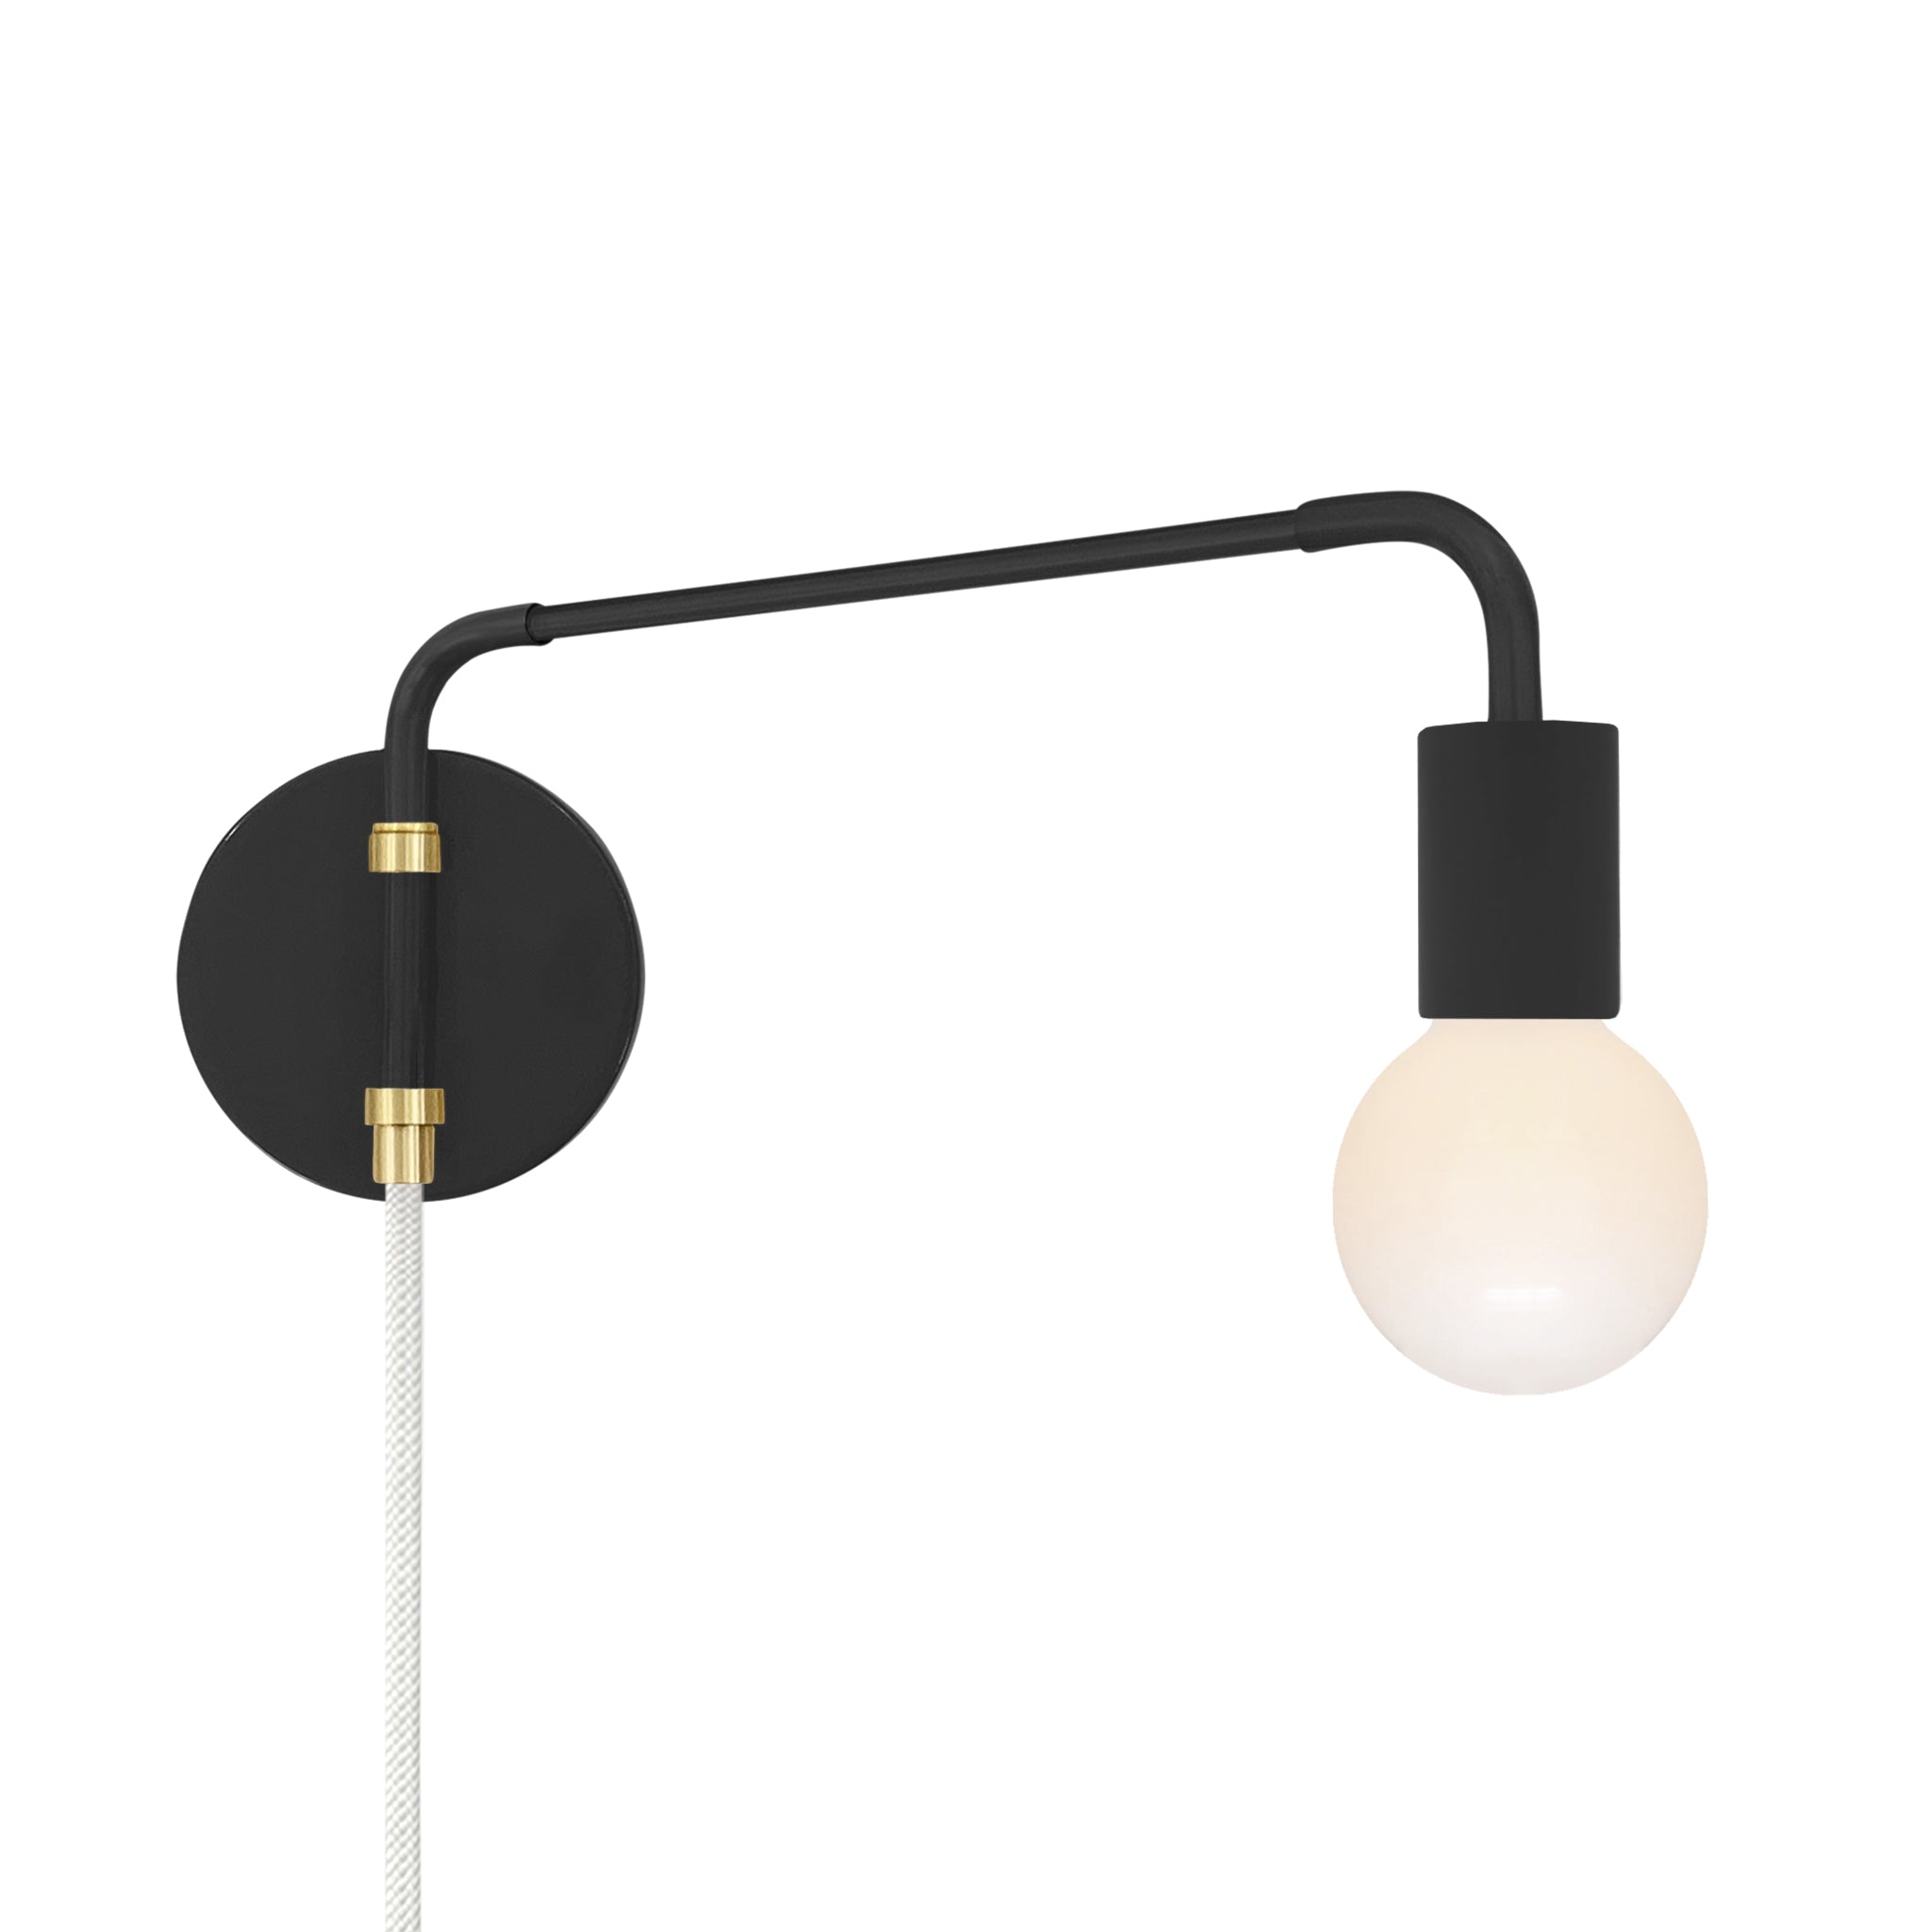 Brass and black color Sway plug-in sconce Dutton Brown lighting